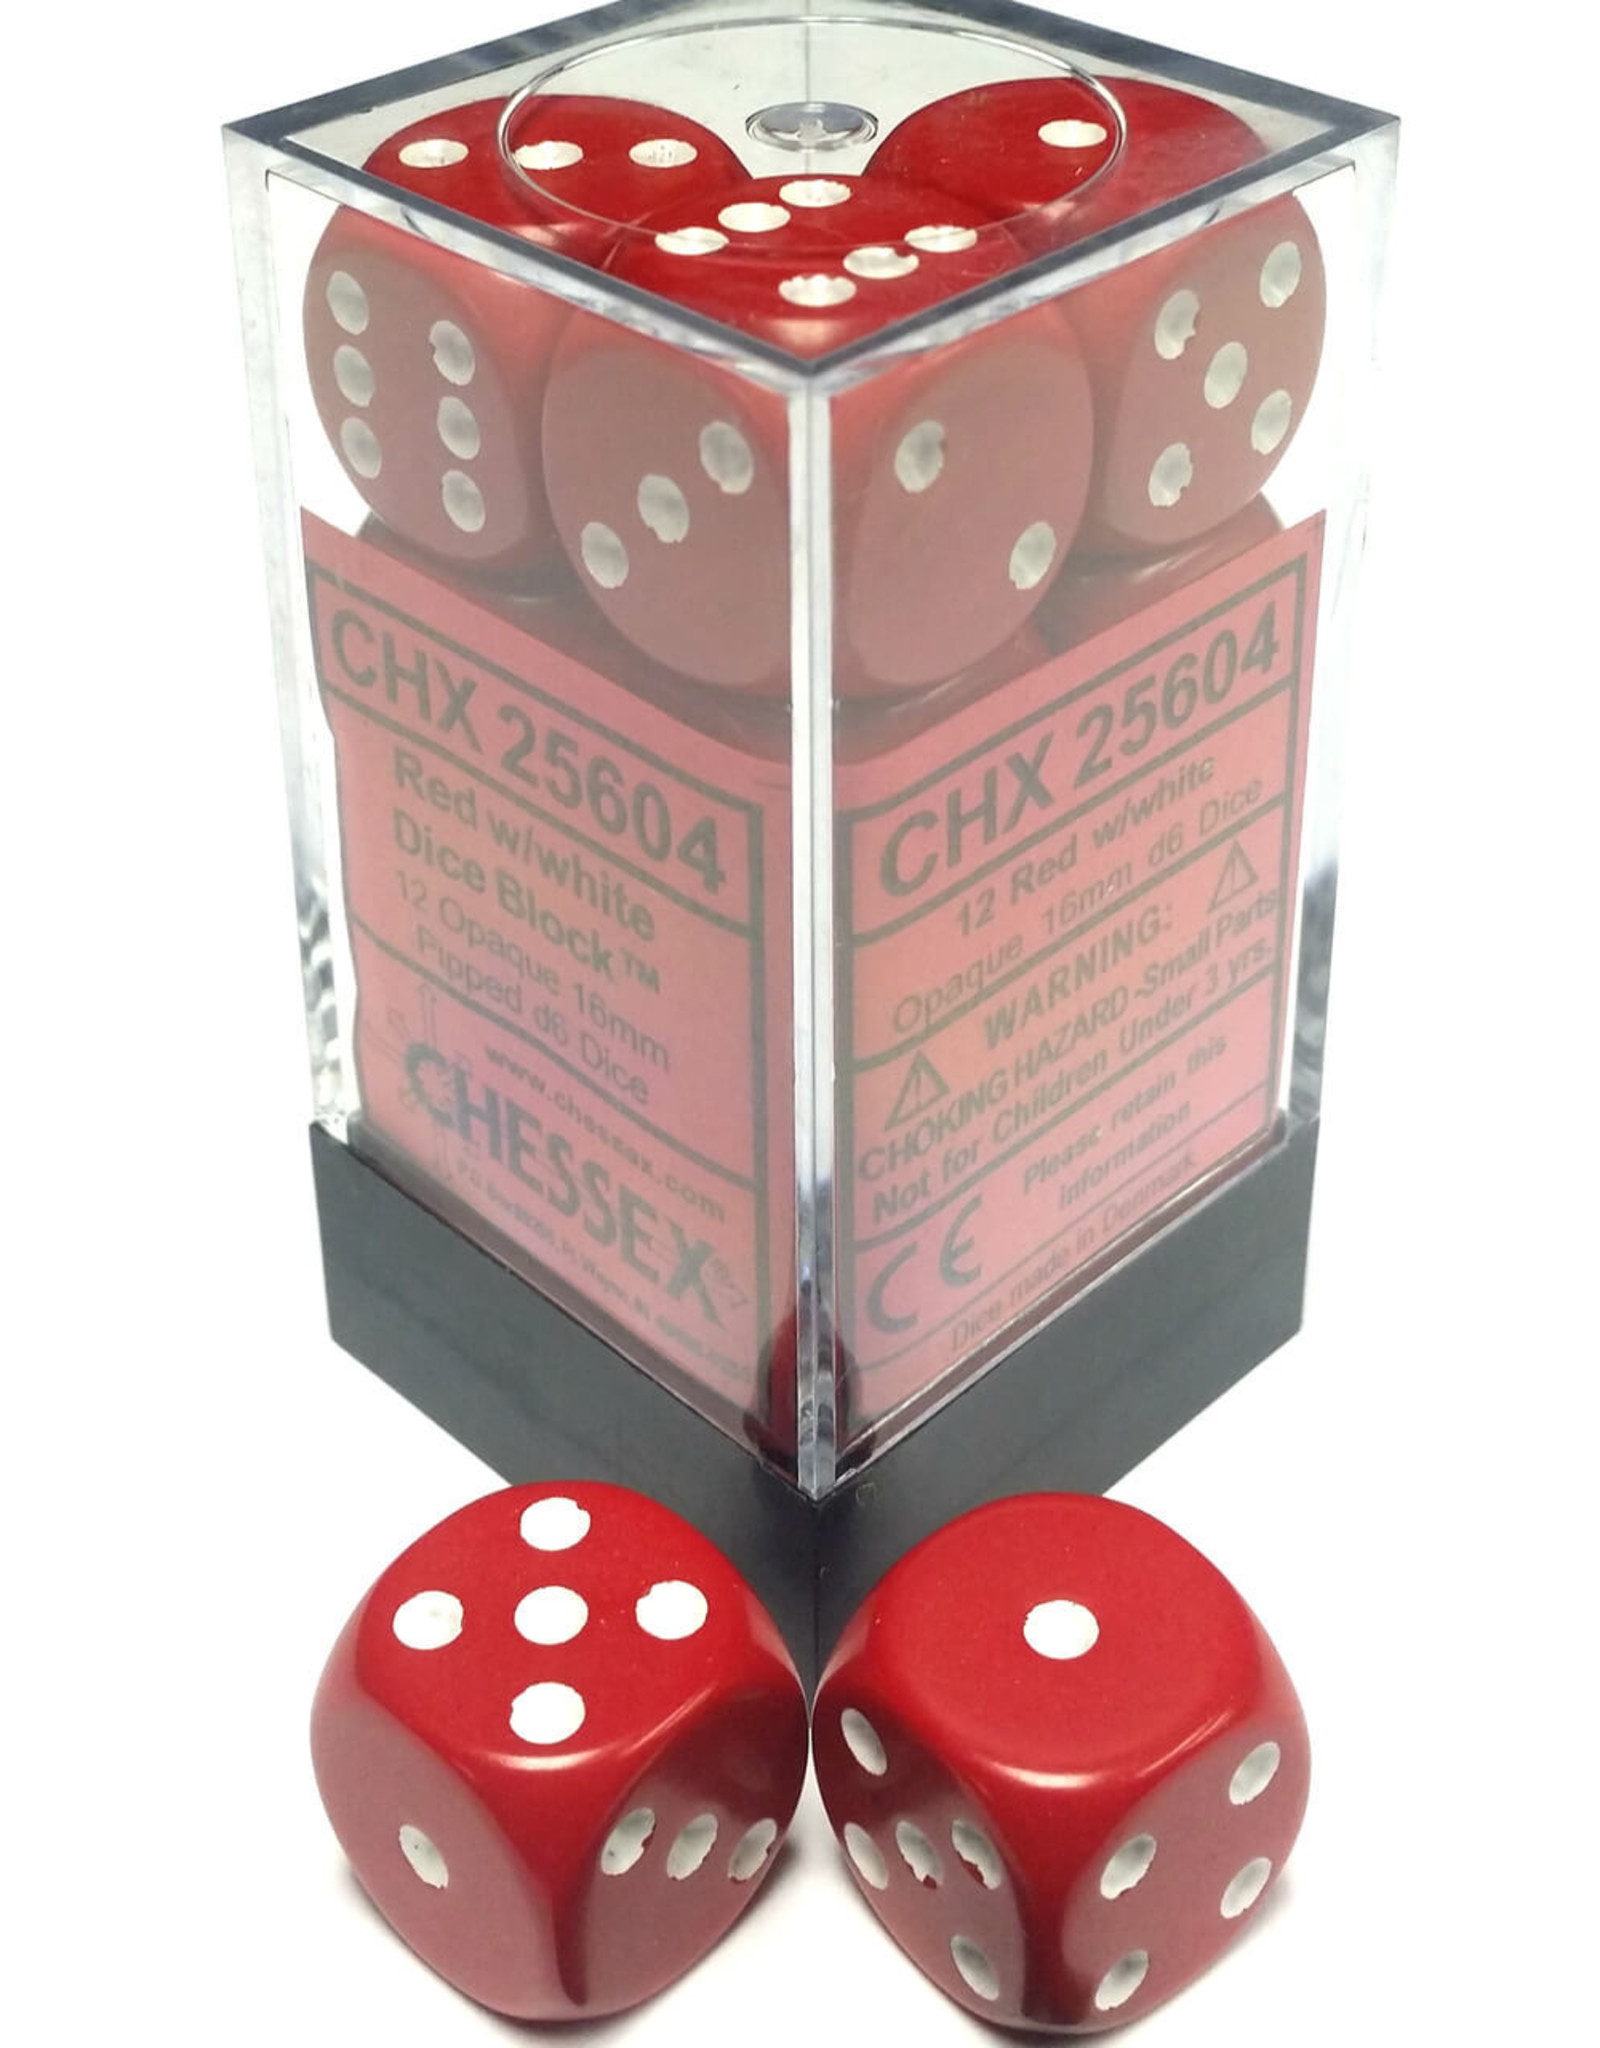 Chessex d6 Cube 16mm Opaque Red with White (12)